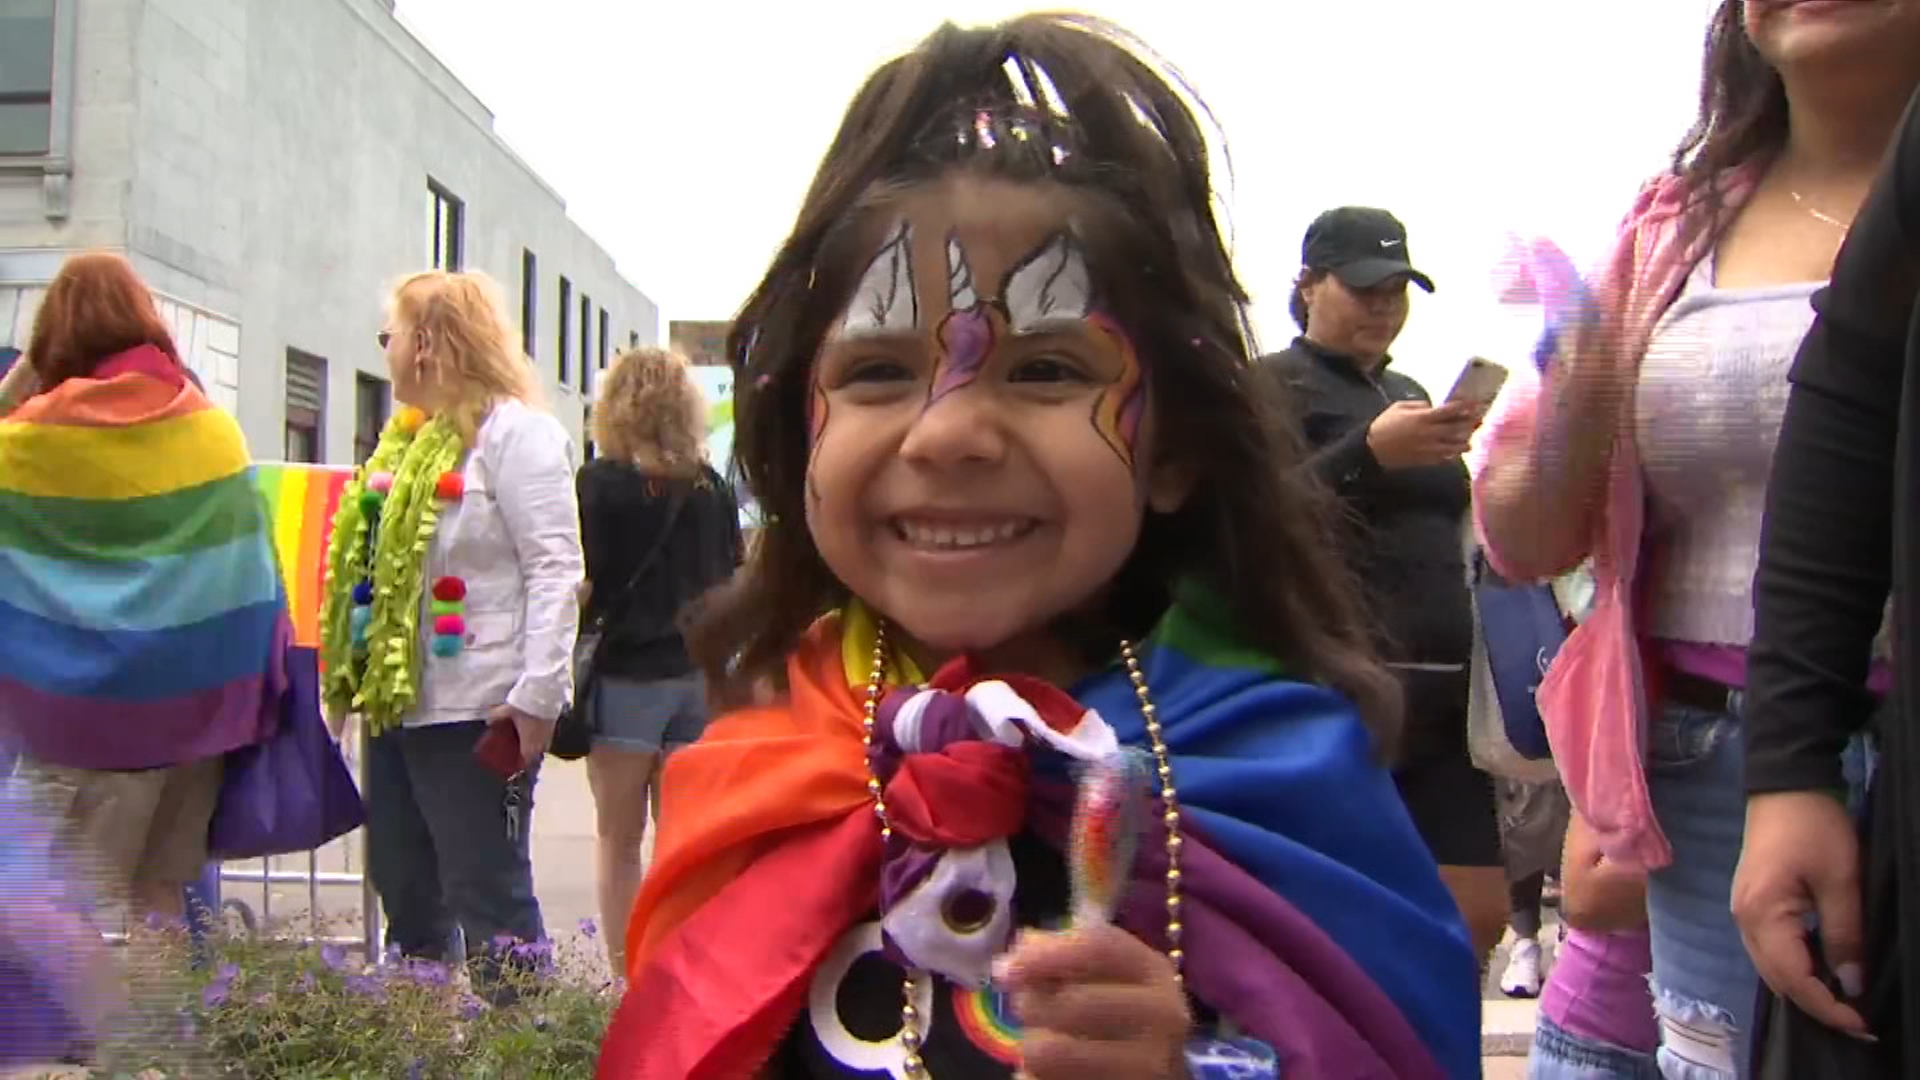 Aurora Pride Parade Goes On Sunday After Weeks of Controversy – NBC Chicago